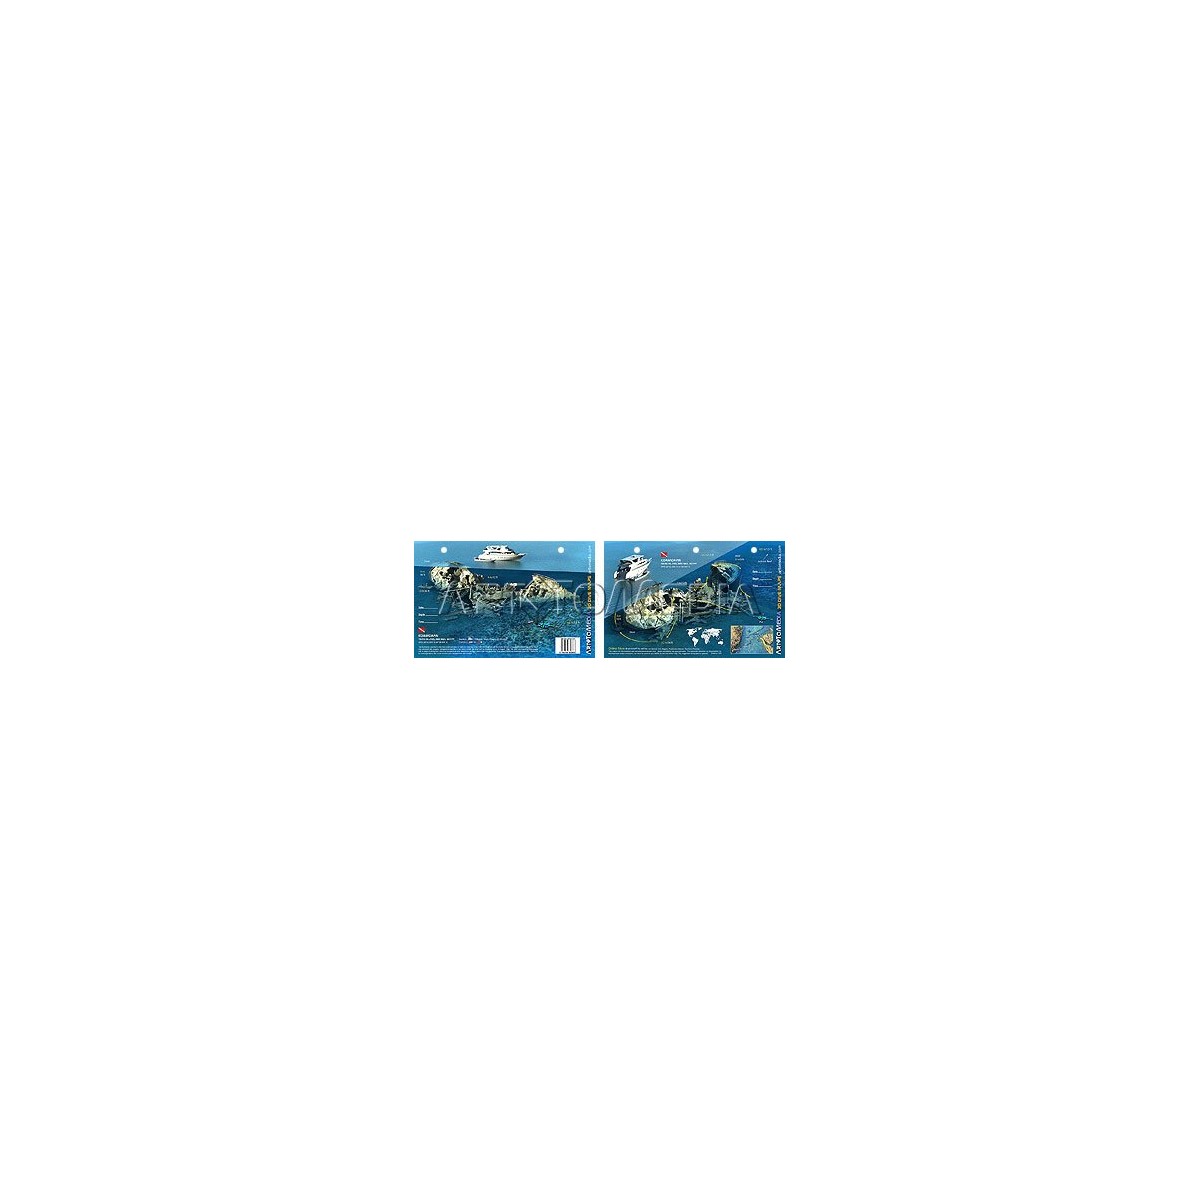 Kormoran in the Red Sea, Egypt (8.5 x 5.5 Inches) (21.6 x 15cm) - New Art to Media Underwater Waterproof 3D Dive Site Map